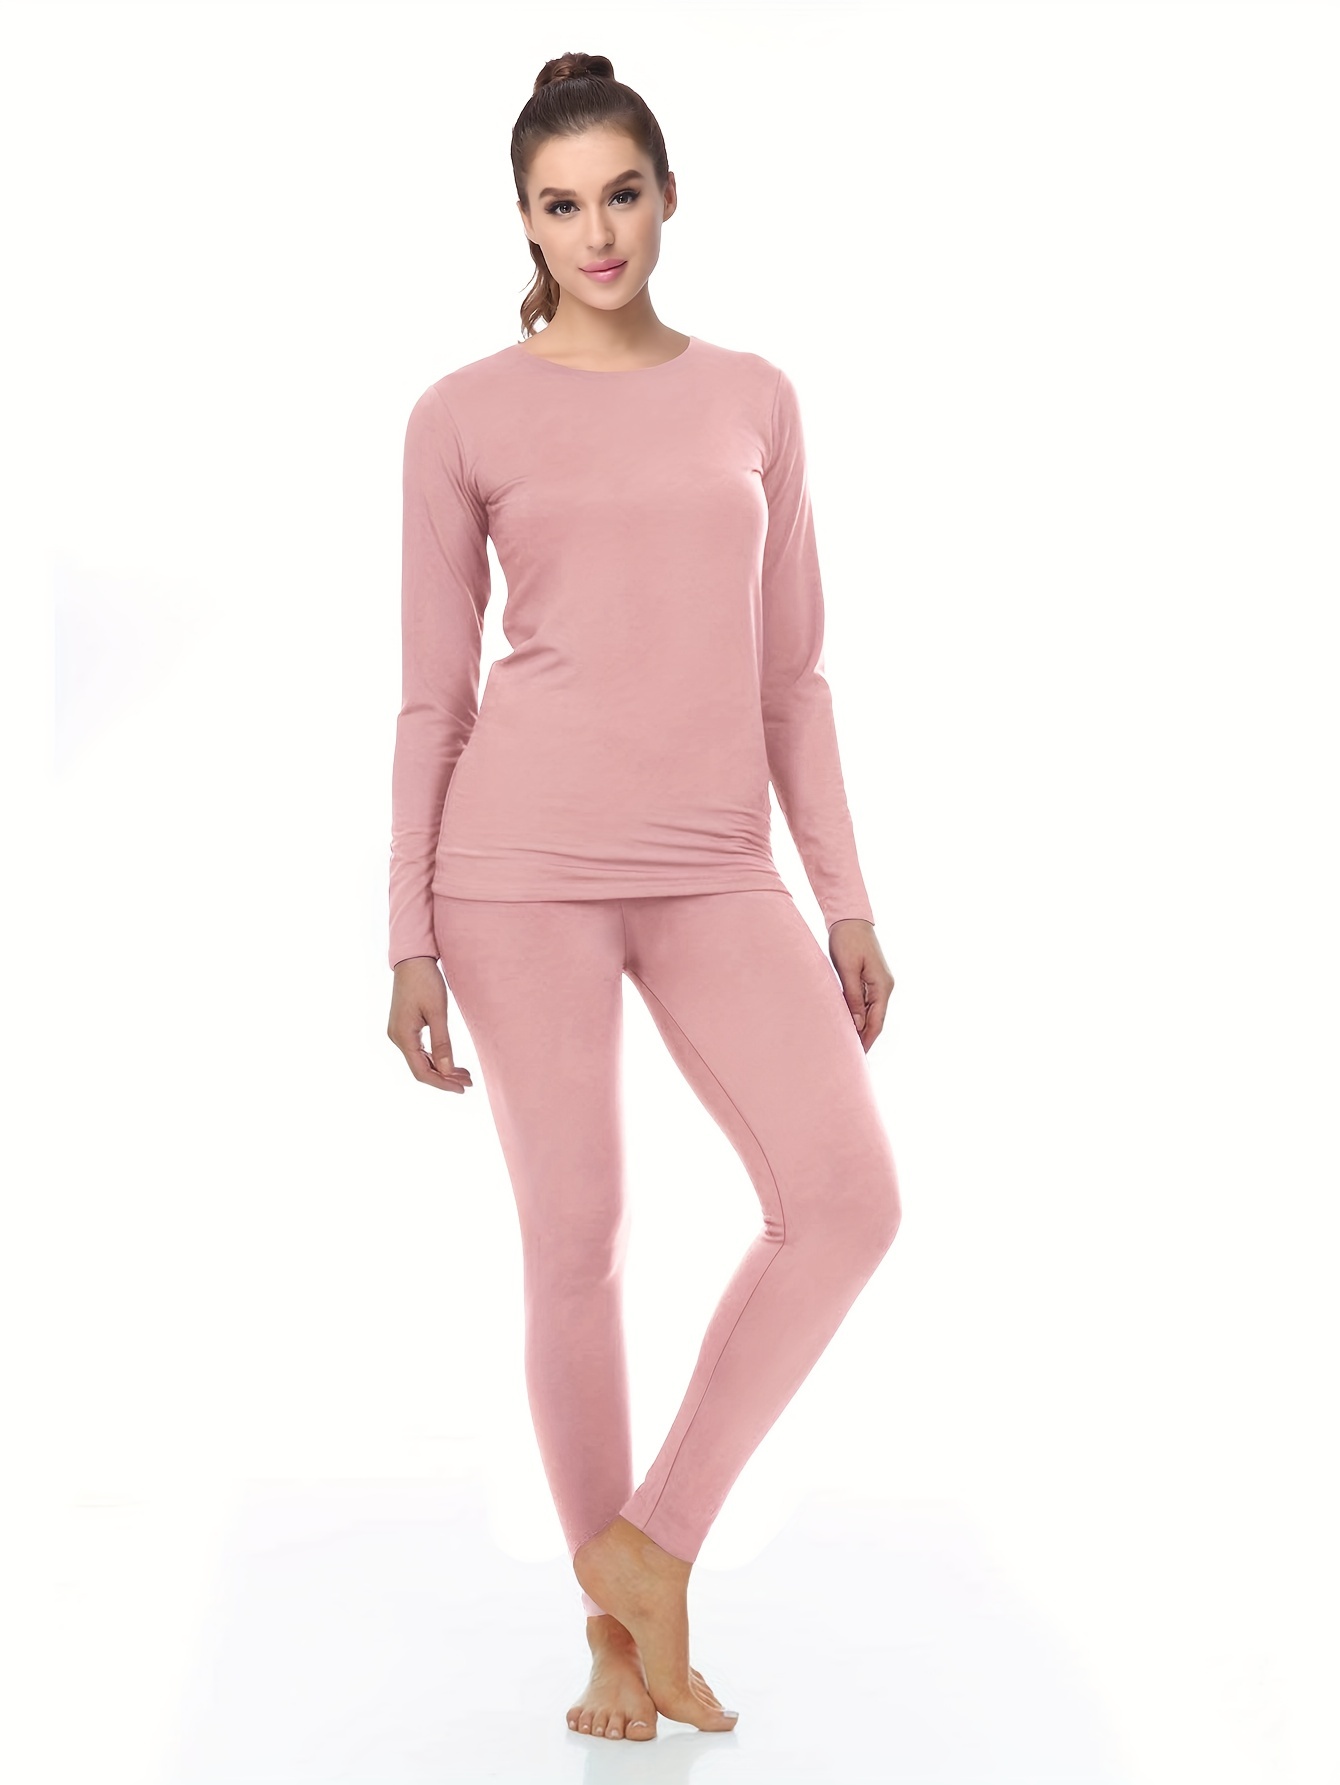 Womens Fleece Lined Seamless Thermal Underwear Set Base Layer Top And  Bottoms With Free Cutting Seamless Crew Neck And Long Sleeved Long Johns  Style 231127 From Shu01, $19.69